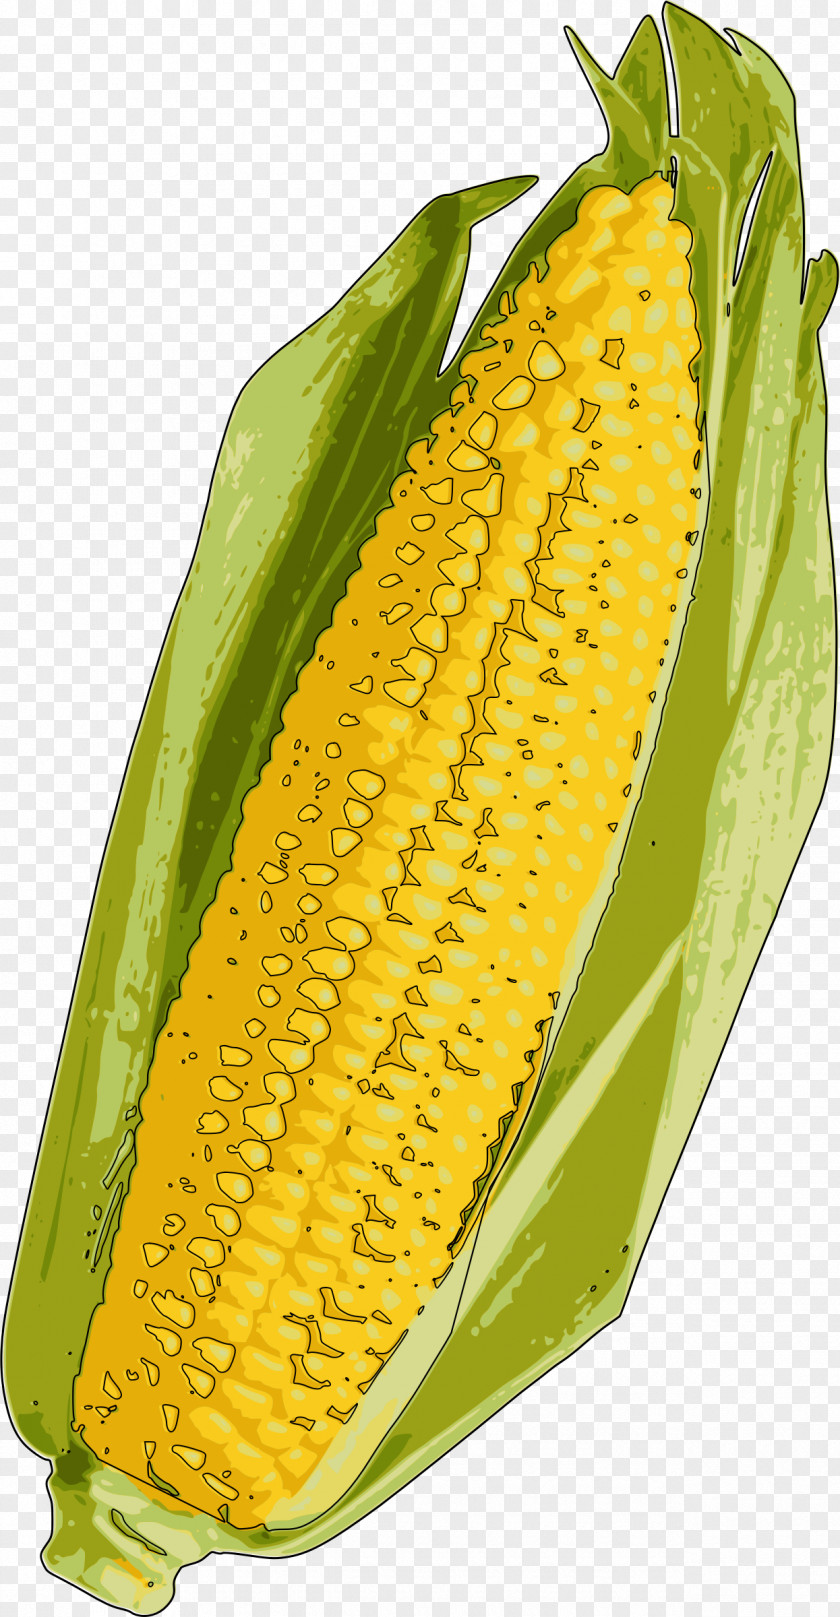 Corn On The Cob Popcorn Candy Flakes Maize PNG